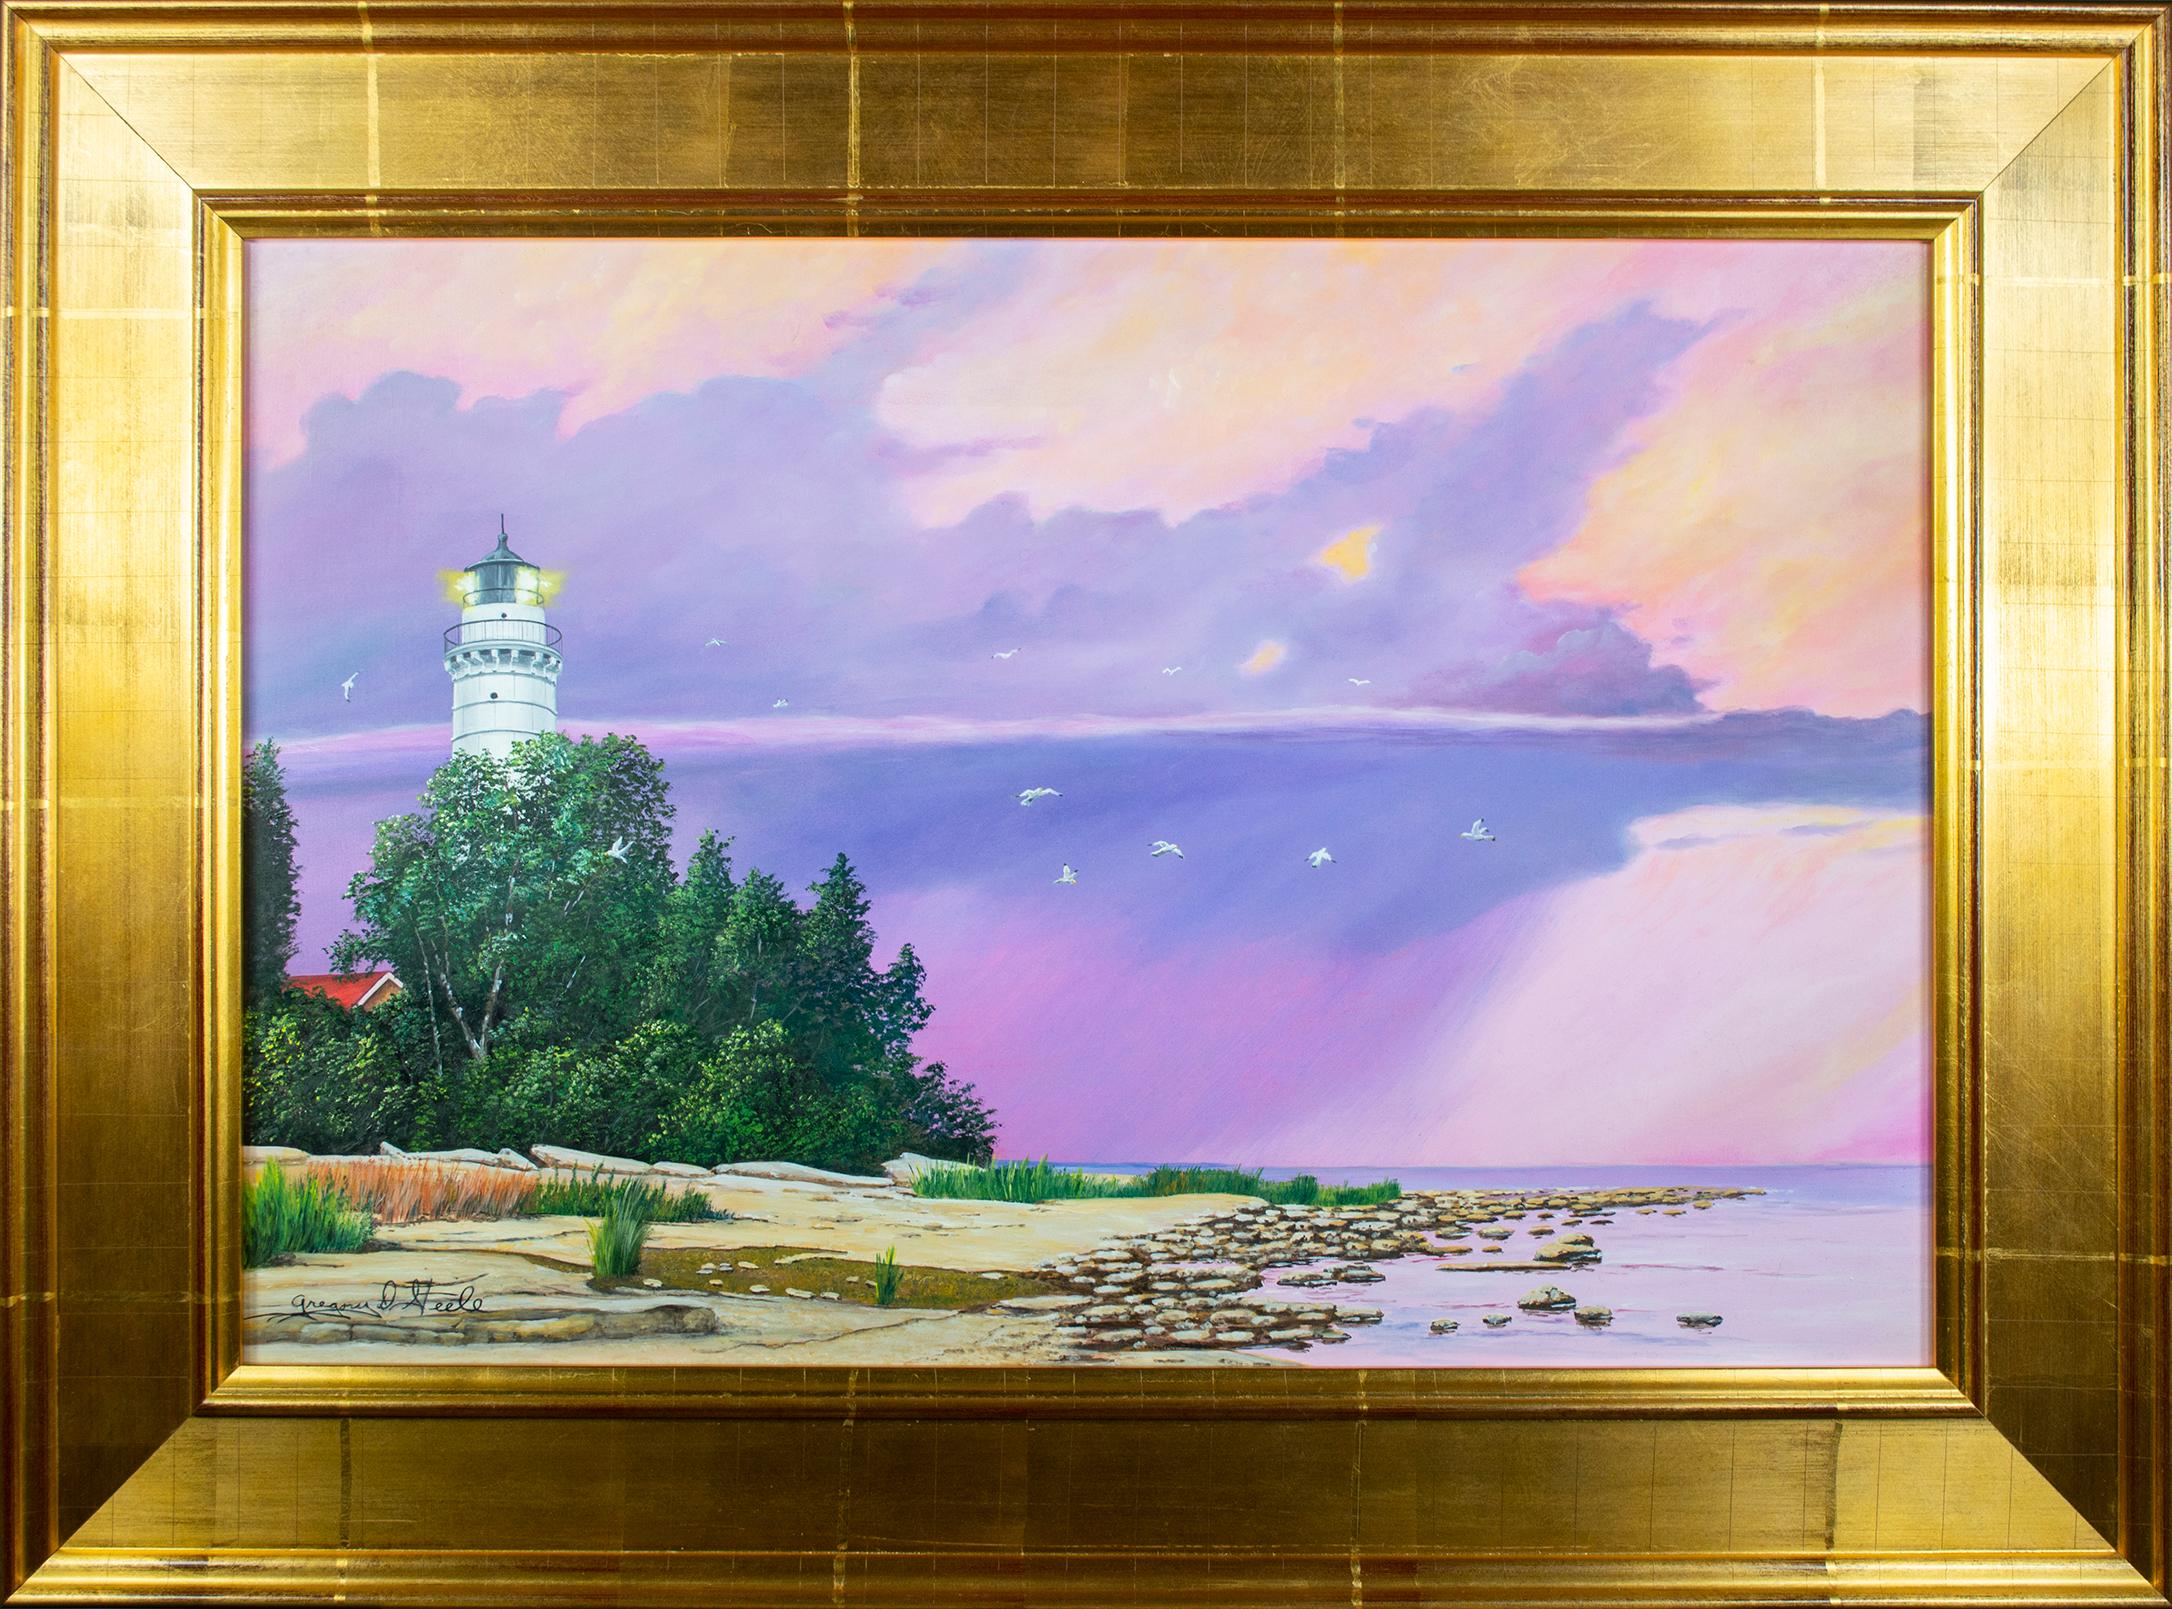 'Cana Island Lighthouse' original painting signed by Gregory Steele, purple